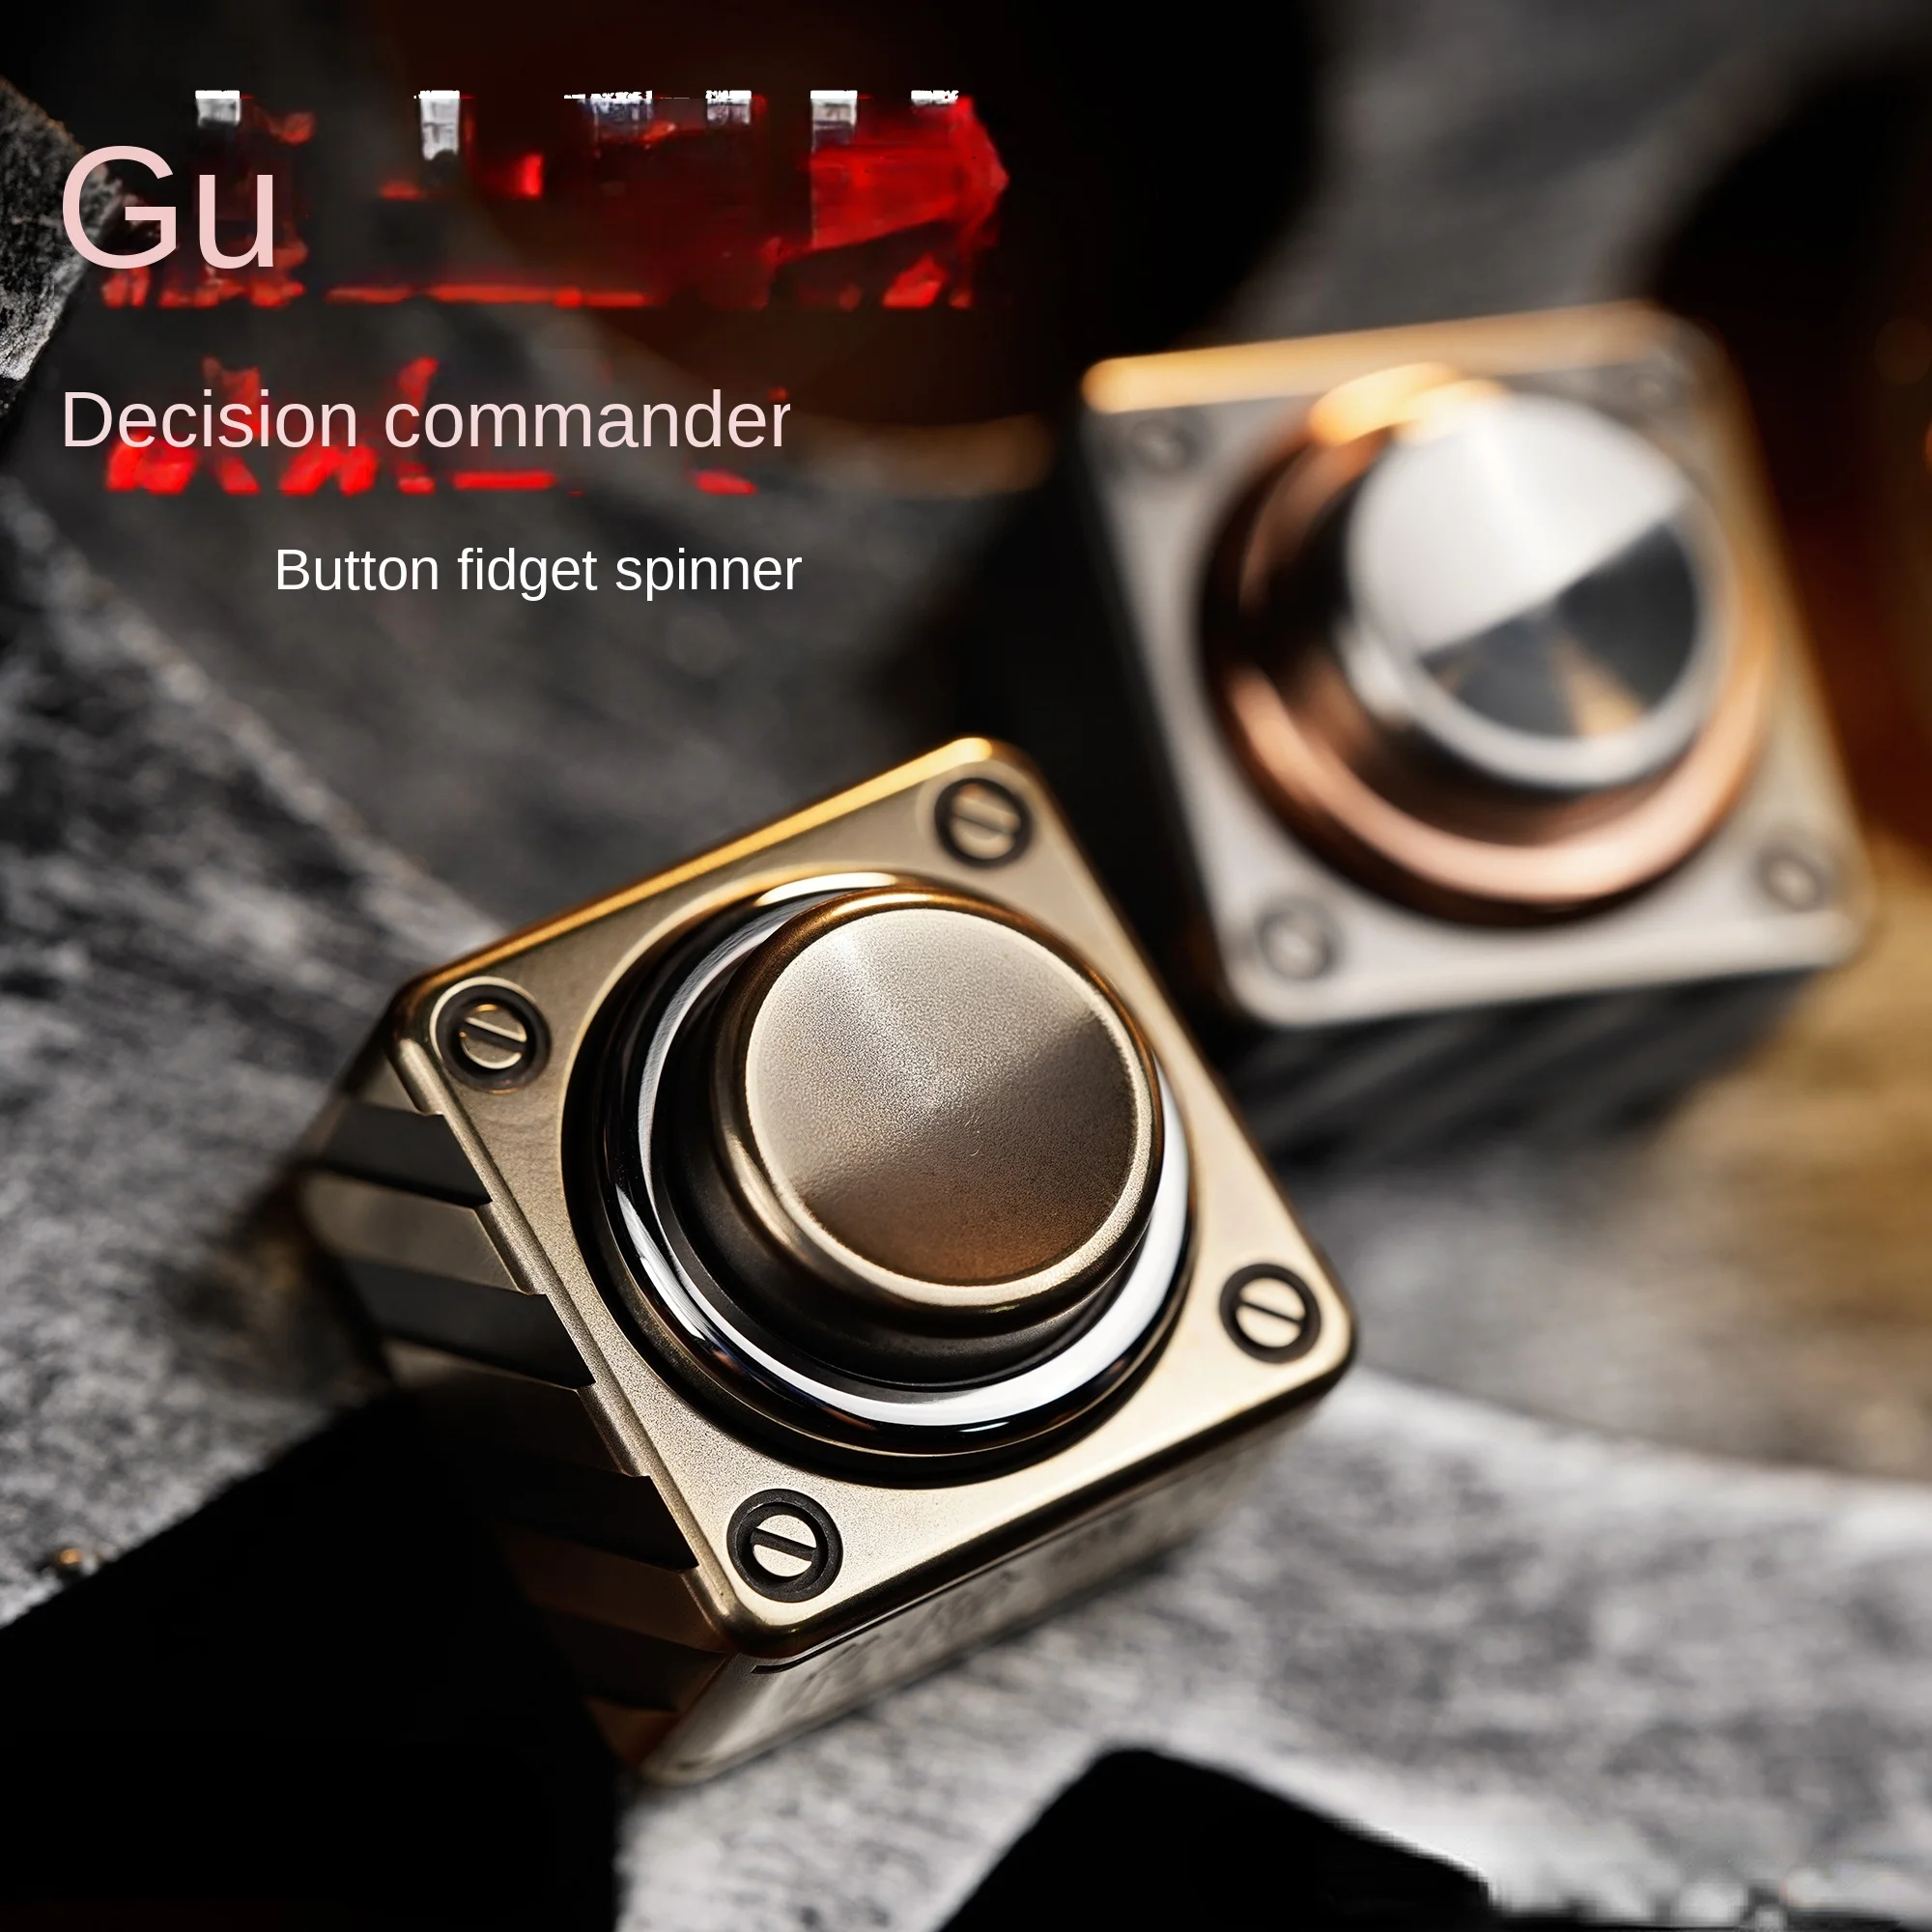 EDC Decision Commander Waste Soil Technology Combination Button Fingertip Gyro Metal Toy Decompression Artifact